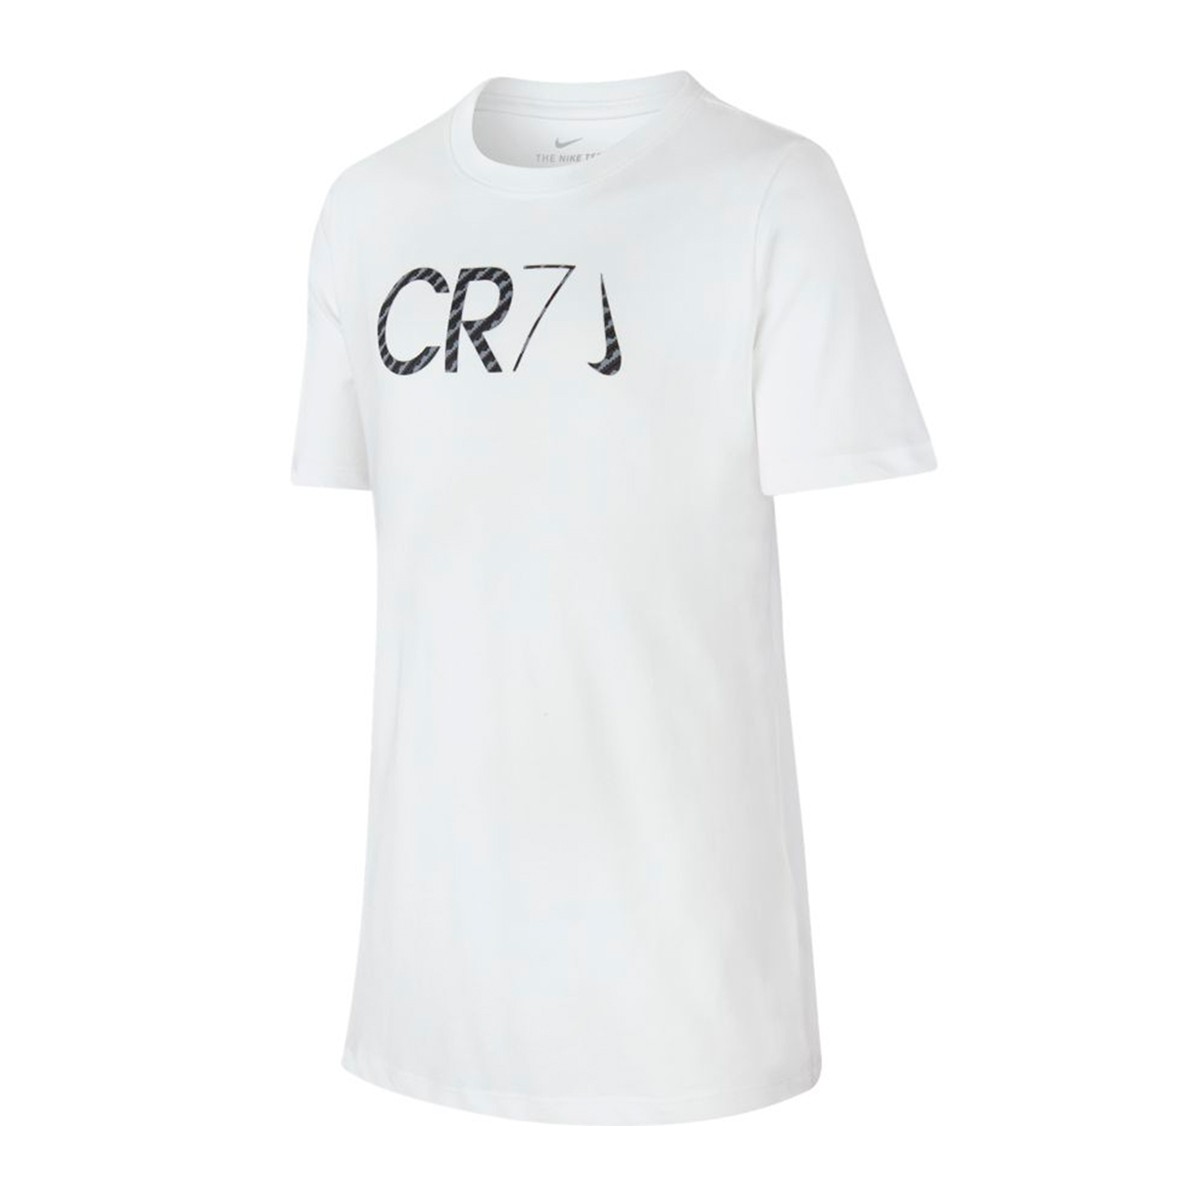 cr7 jersey for kids